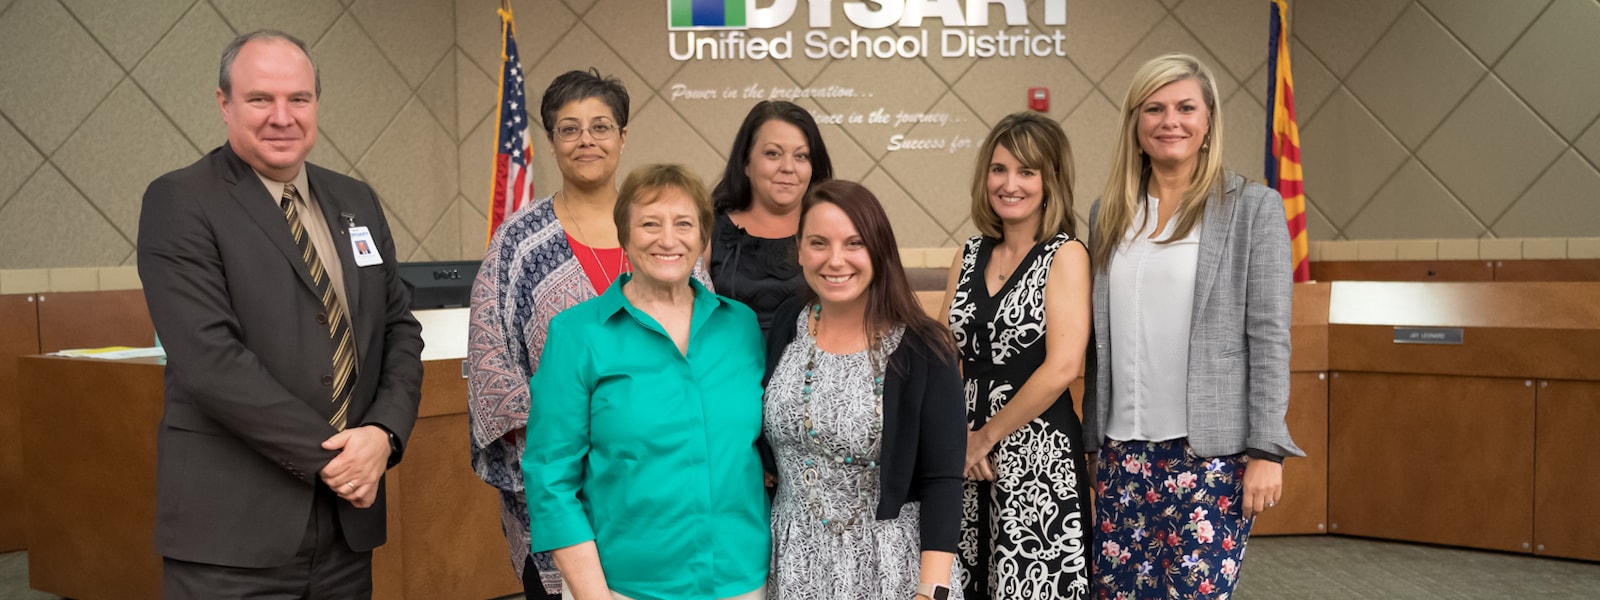 Heather Casey and Sharon Beard pose for a photo with the district governing board and superintendent for being named hometown heroes.